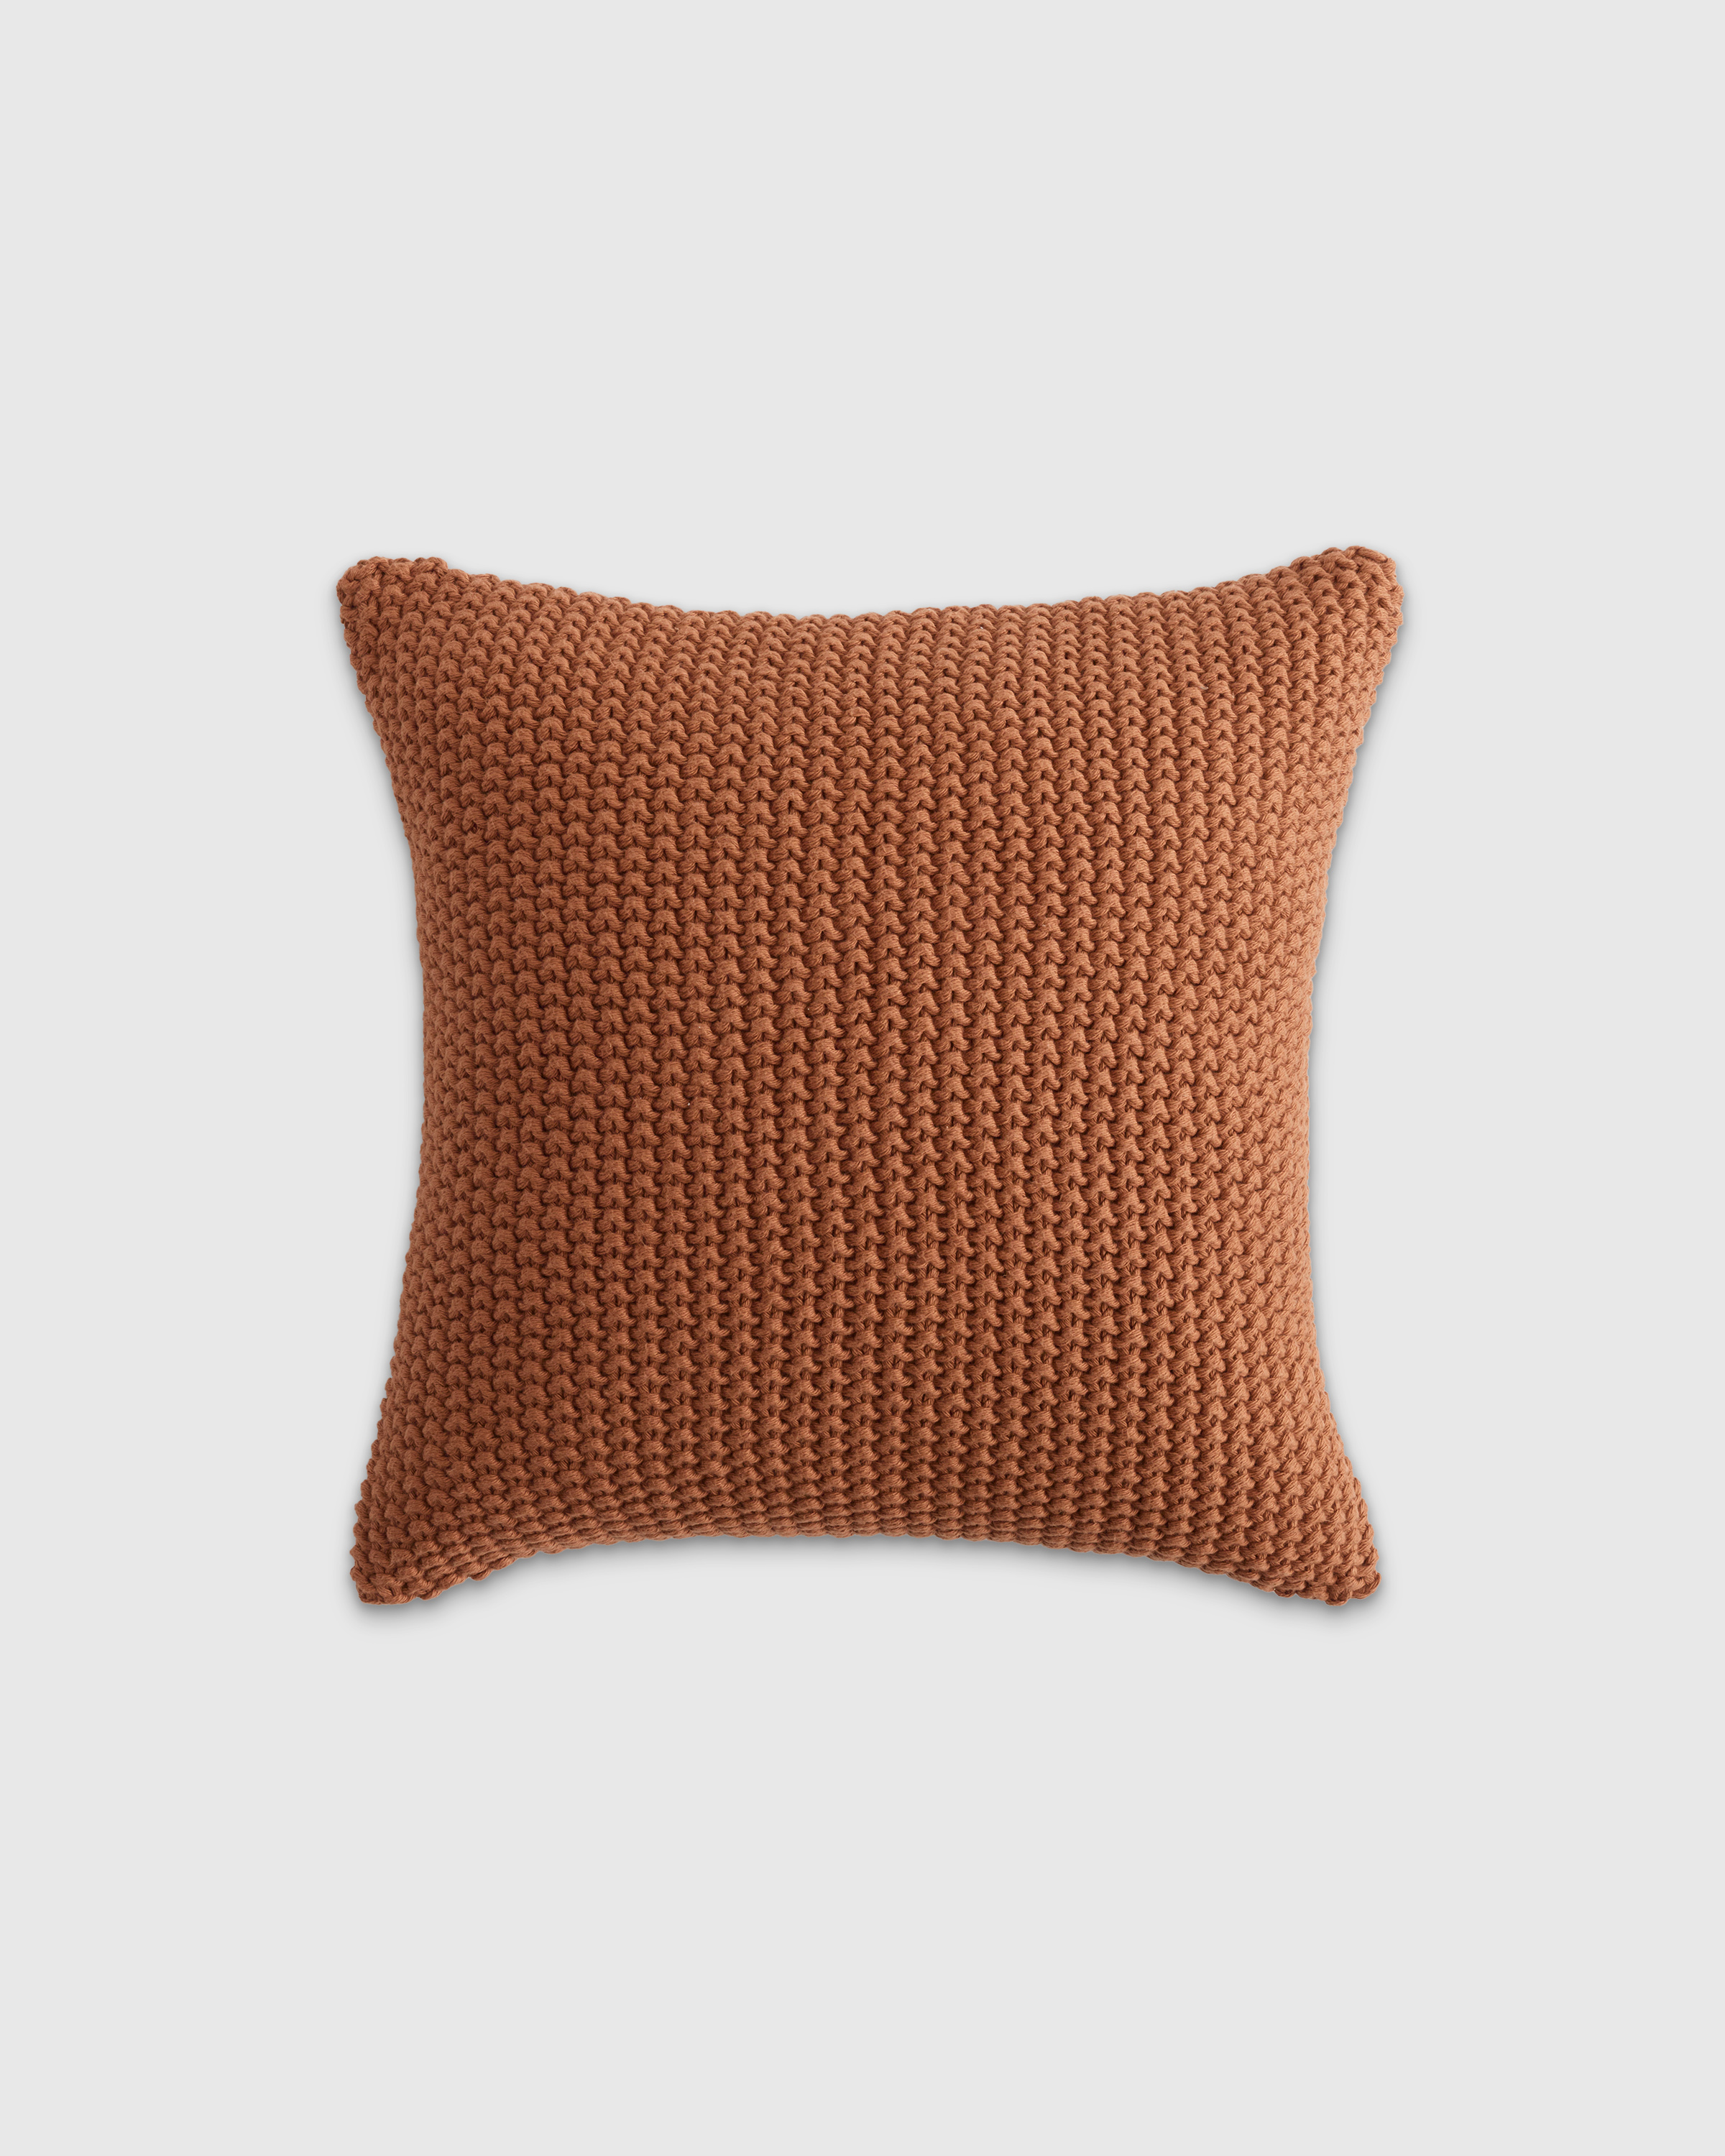 Quince Cotton Fisherman Pillow Cover In White